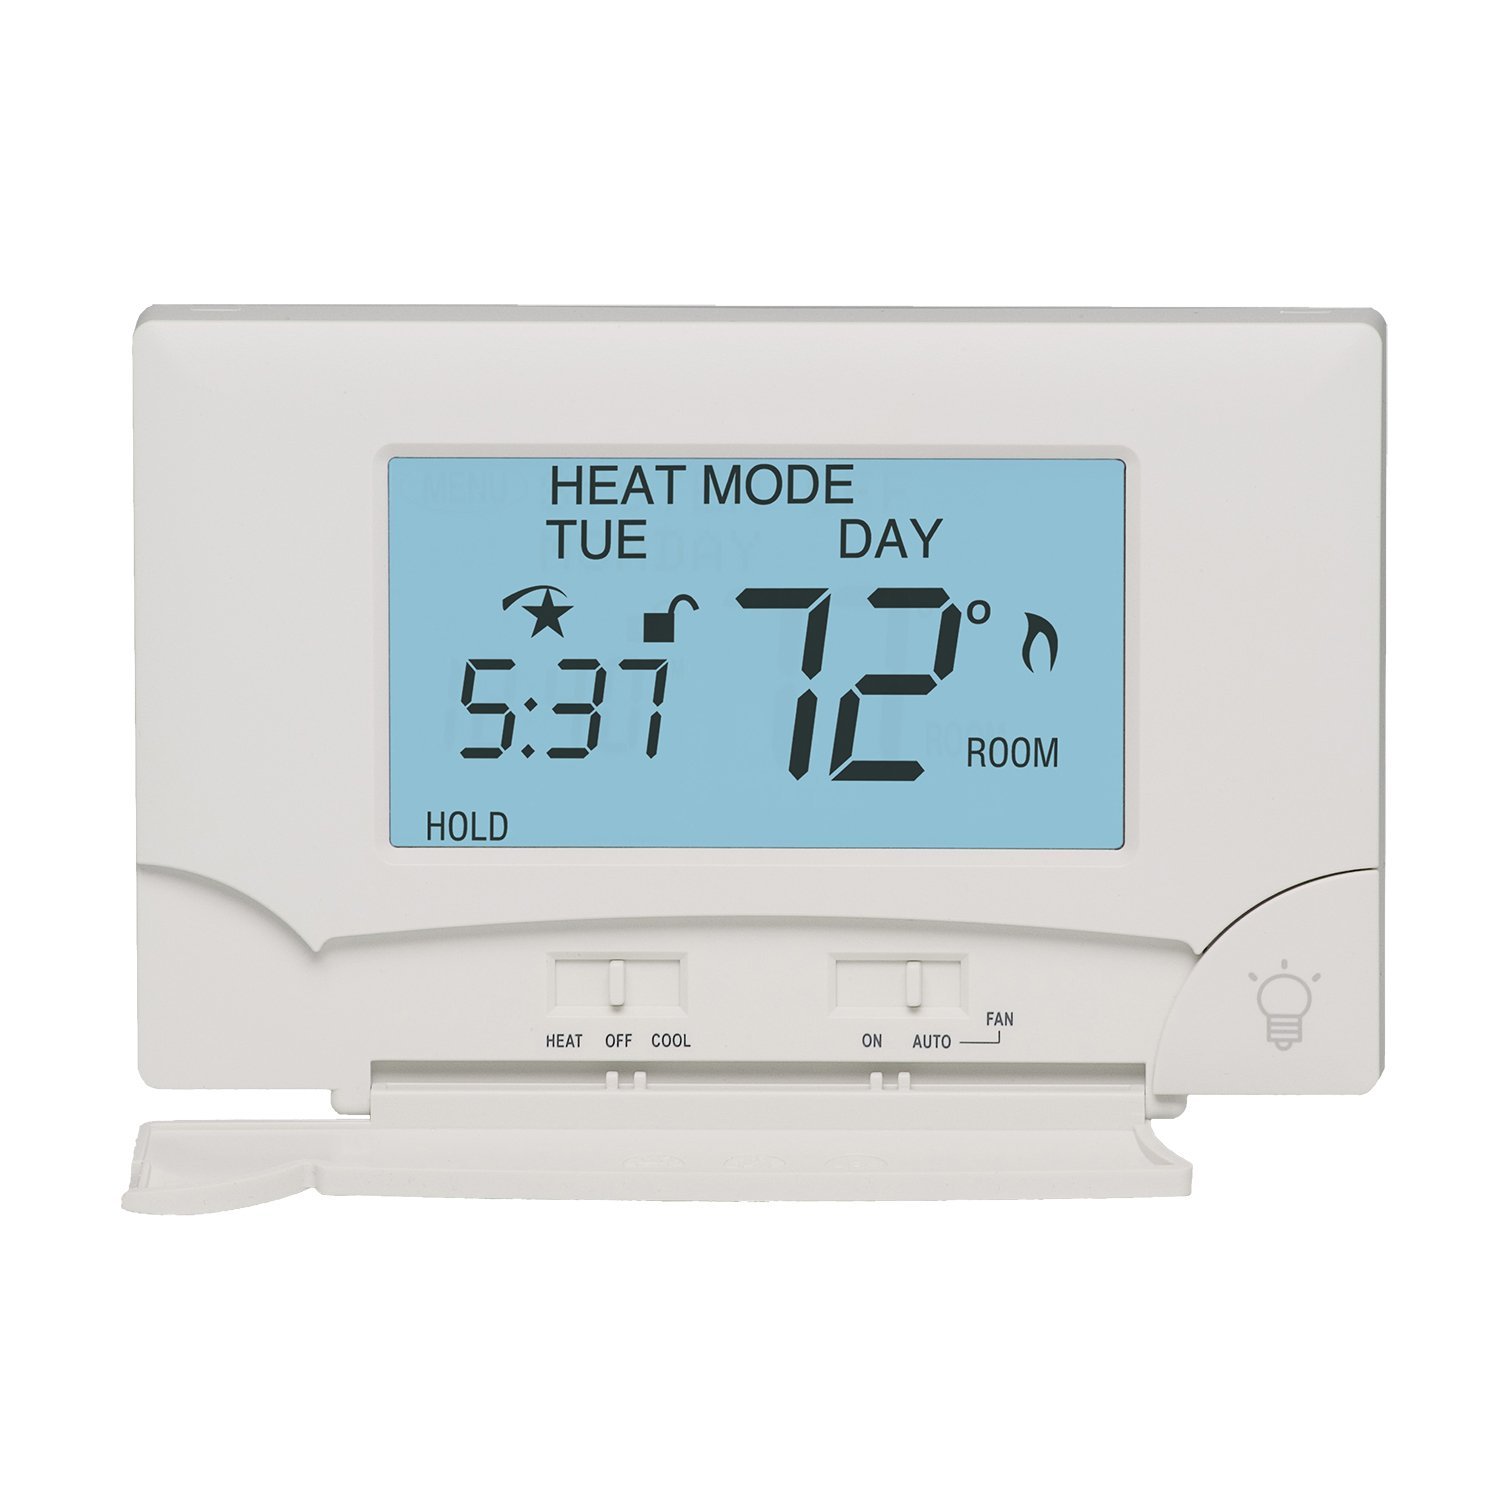 http://thetechjournal.com/wp-content/uploads/images/1202/1329391308-lux-tx9000ts-touch-screen-sevenday-programmable-thermostat-2.jpg